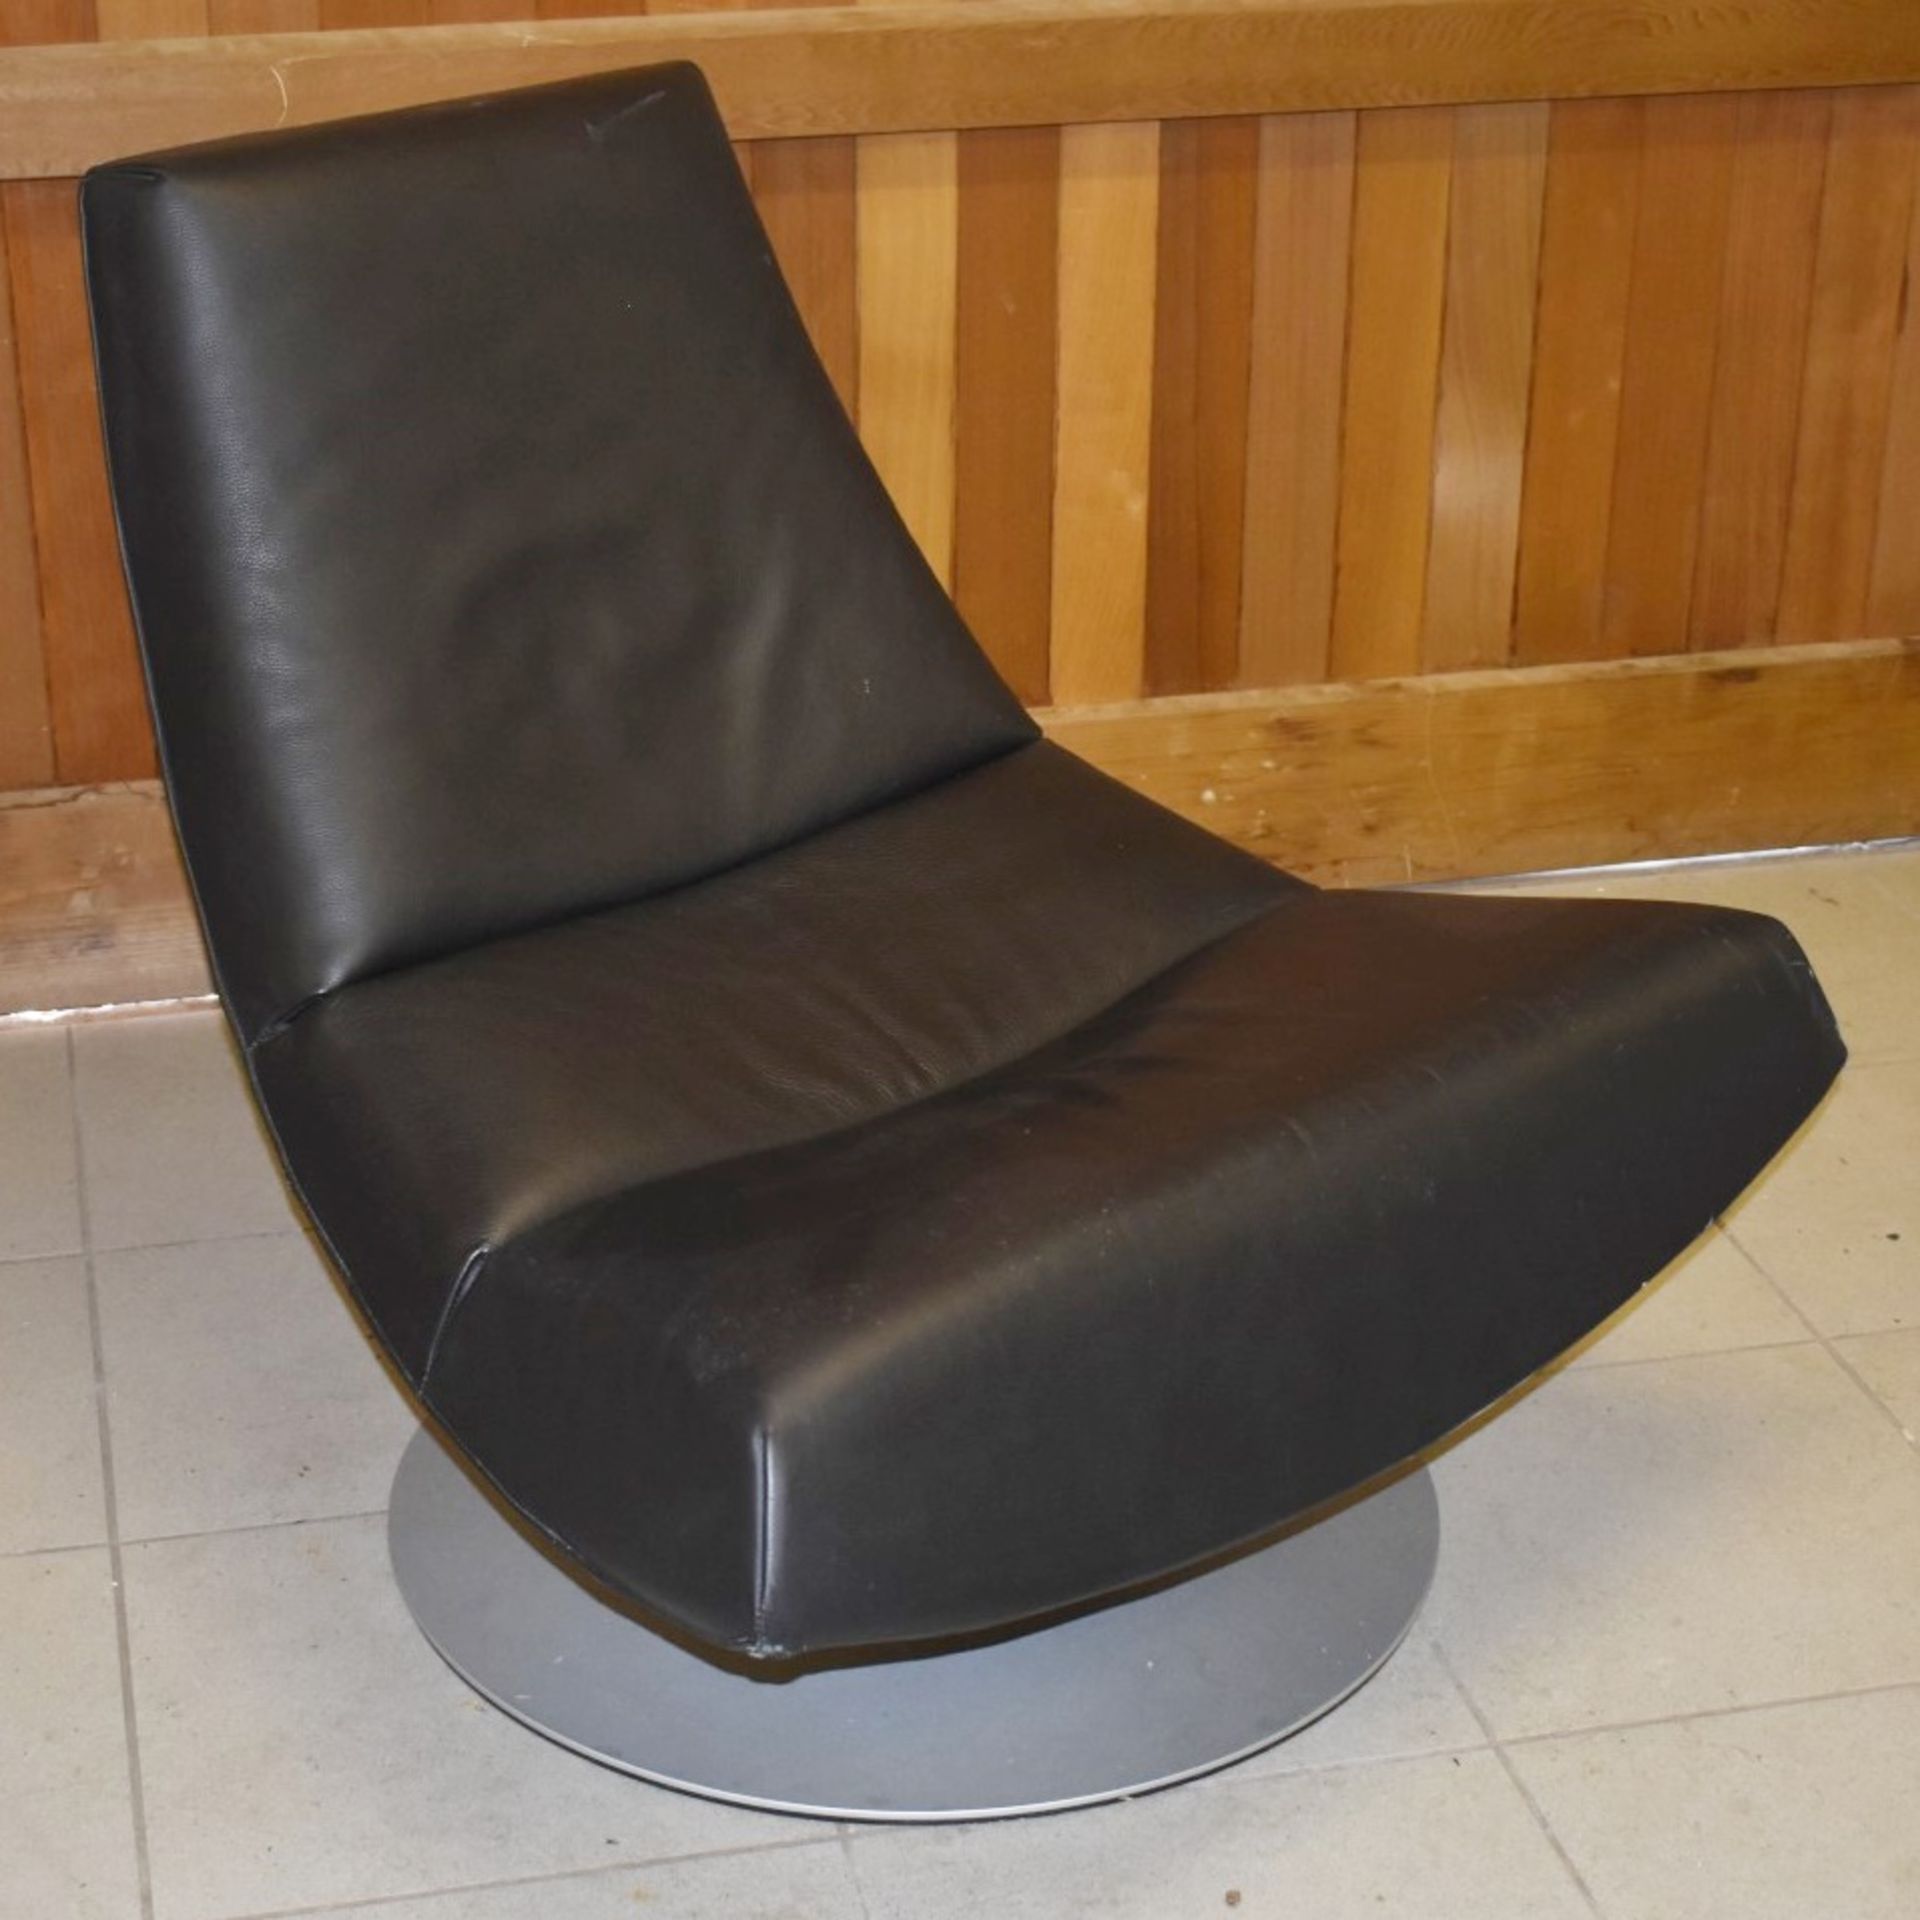 1 x Contemporary Black Leather Swivel Chair With Silver Base - Dimensions: H85/40 x W97 x D100 cms -